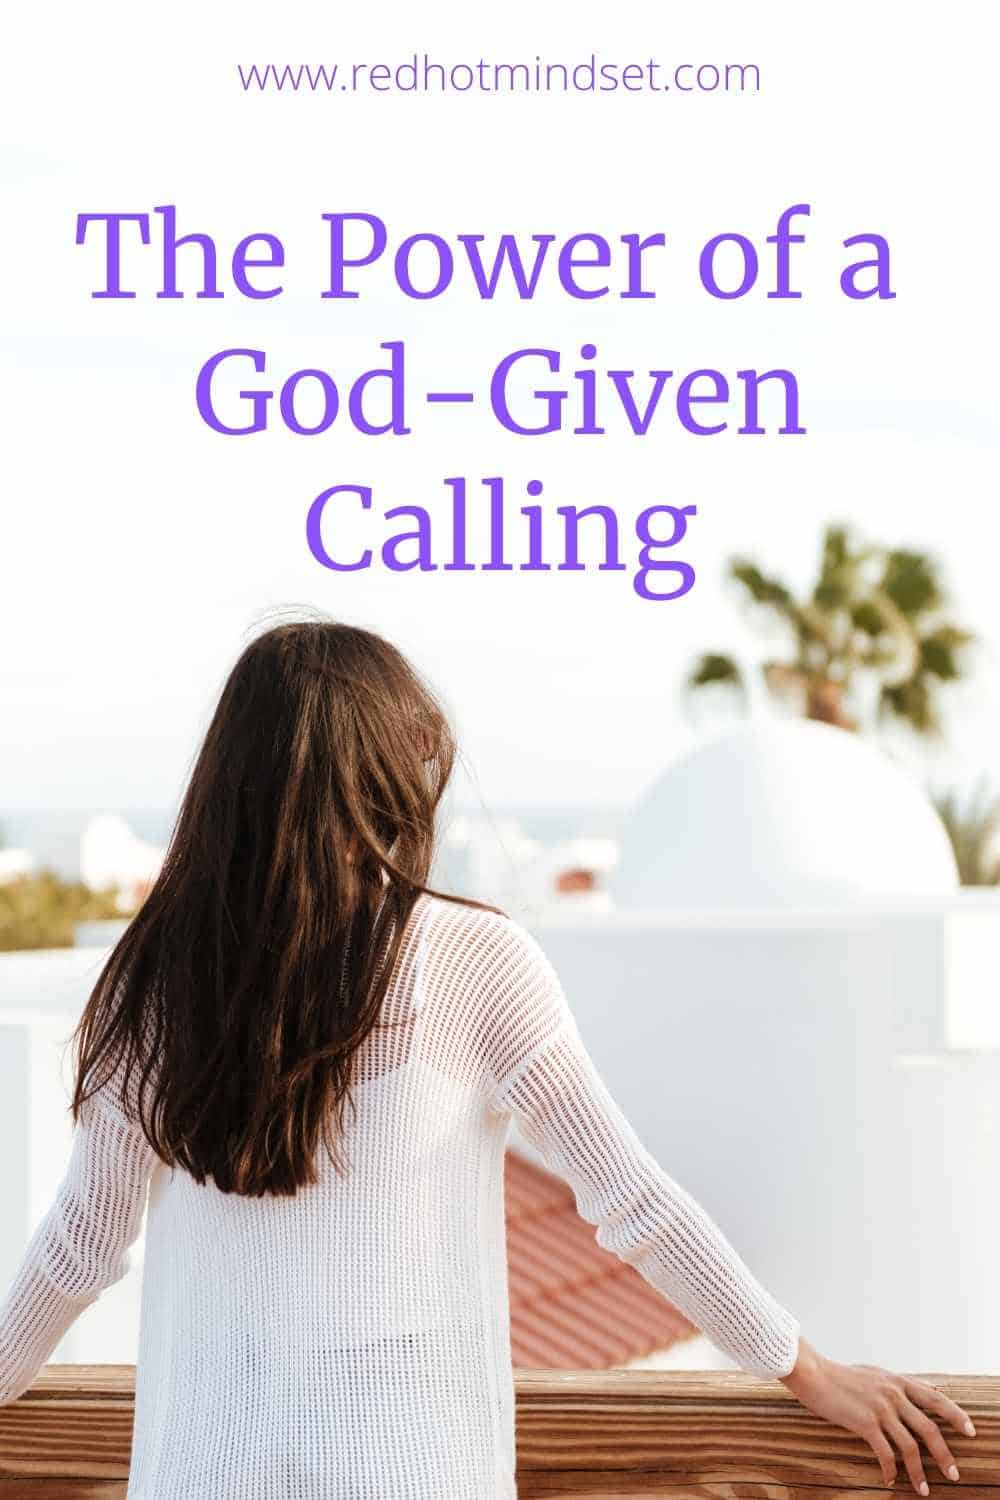 The Power of a God-Given Calling